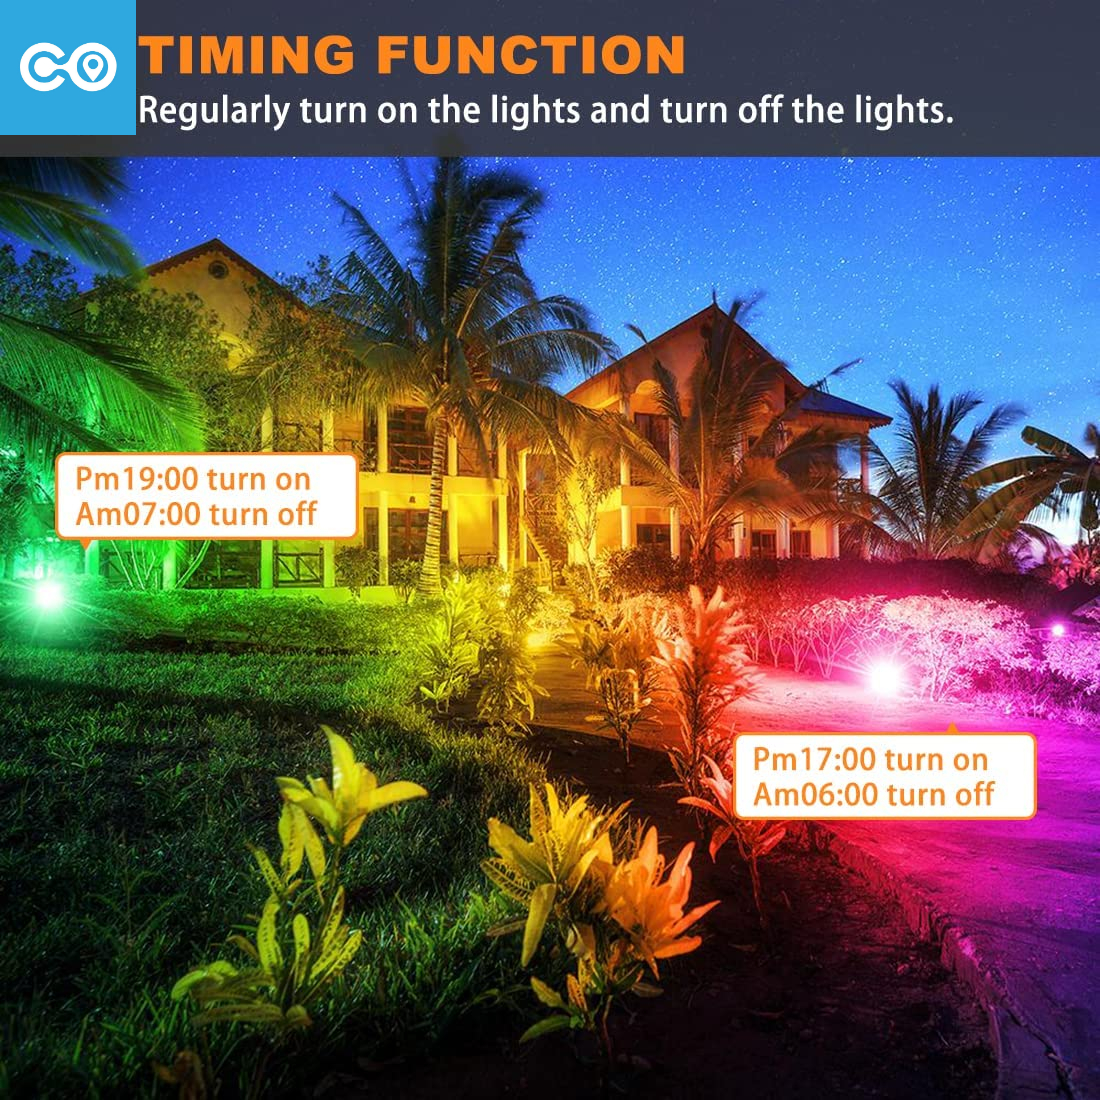 LED Flood Light 300W Equivalent 3000LM Smart RGB Landscape with APP Control  Scenes Timing 5700K Daylight White -Color Changing Uplight IP66  Waterproof US Plug (4 Pack)